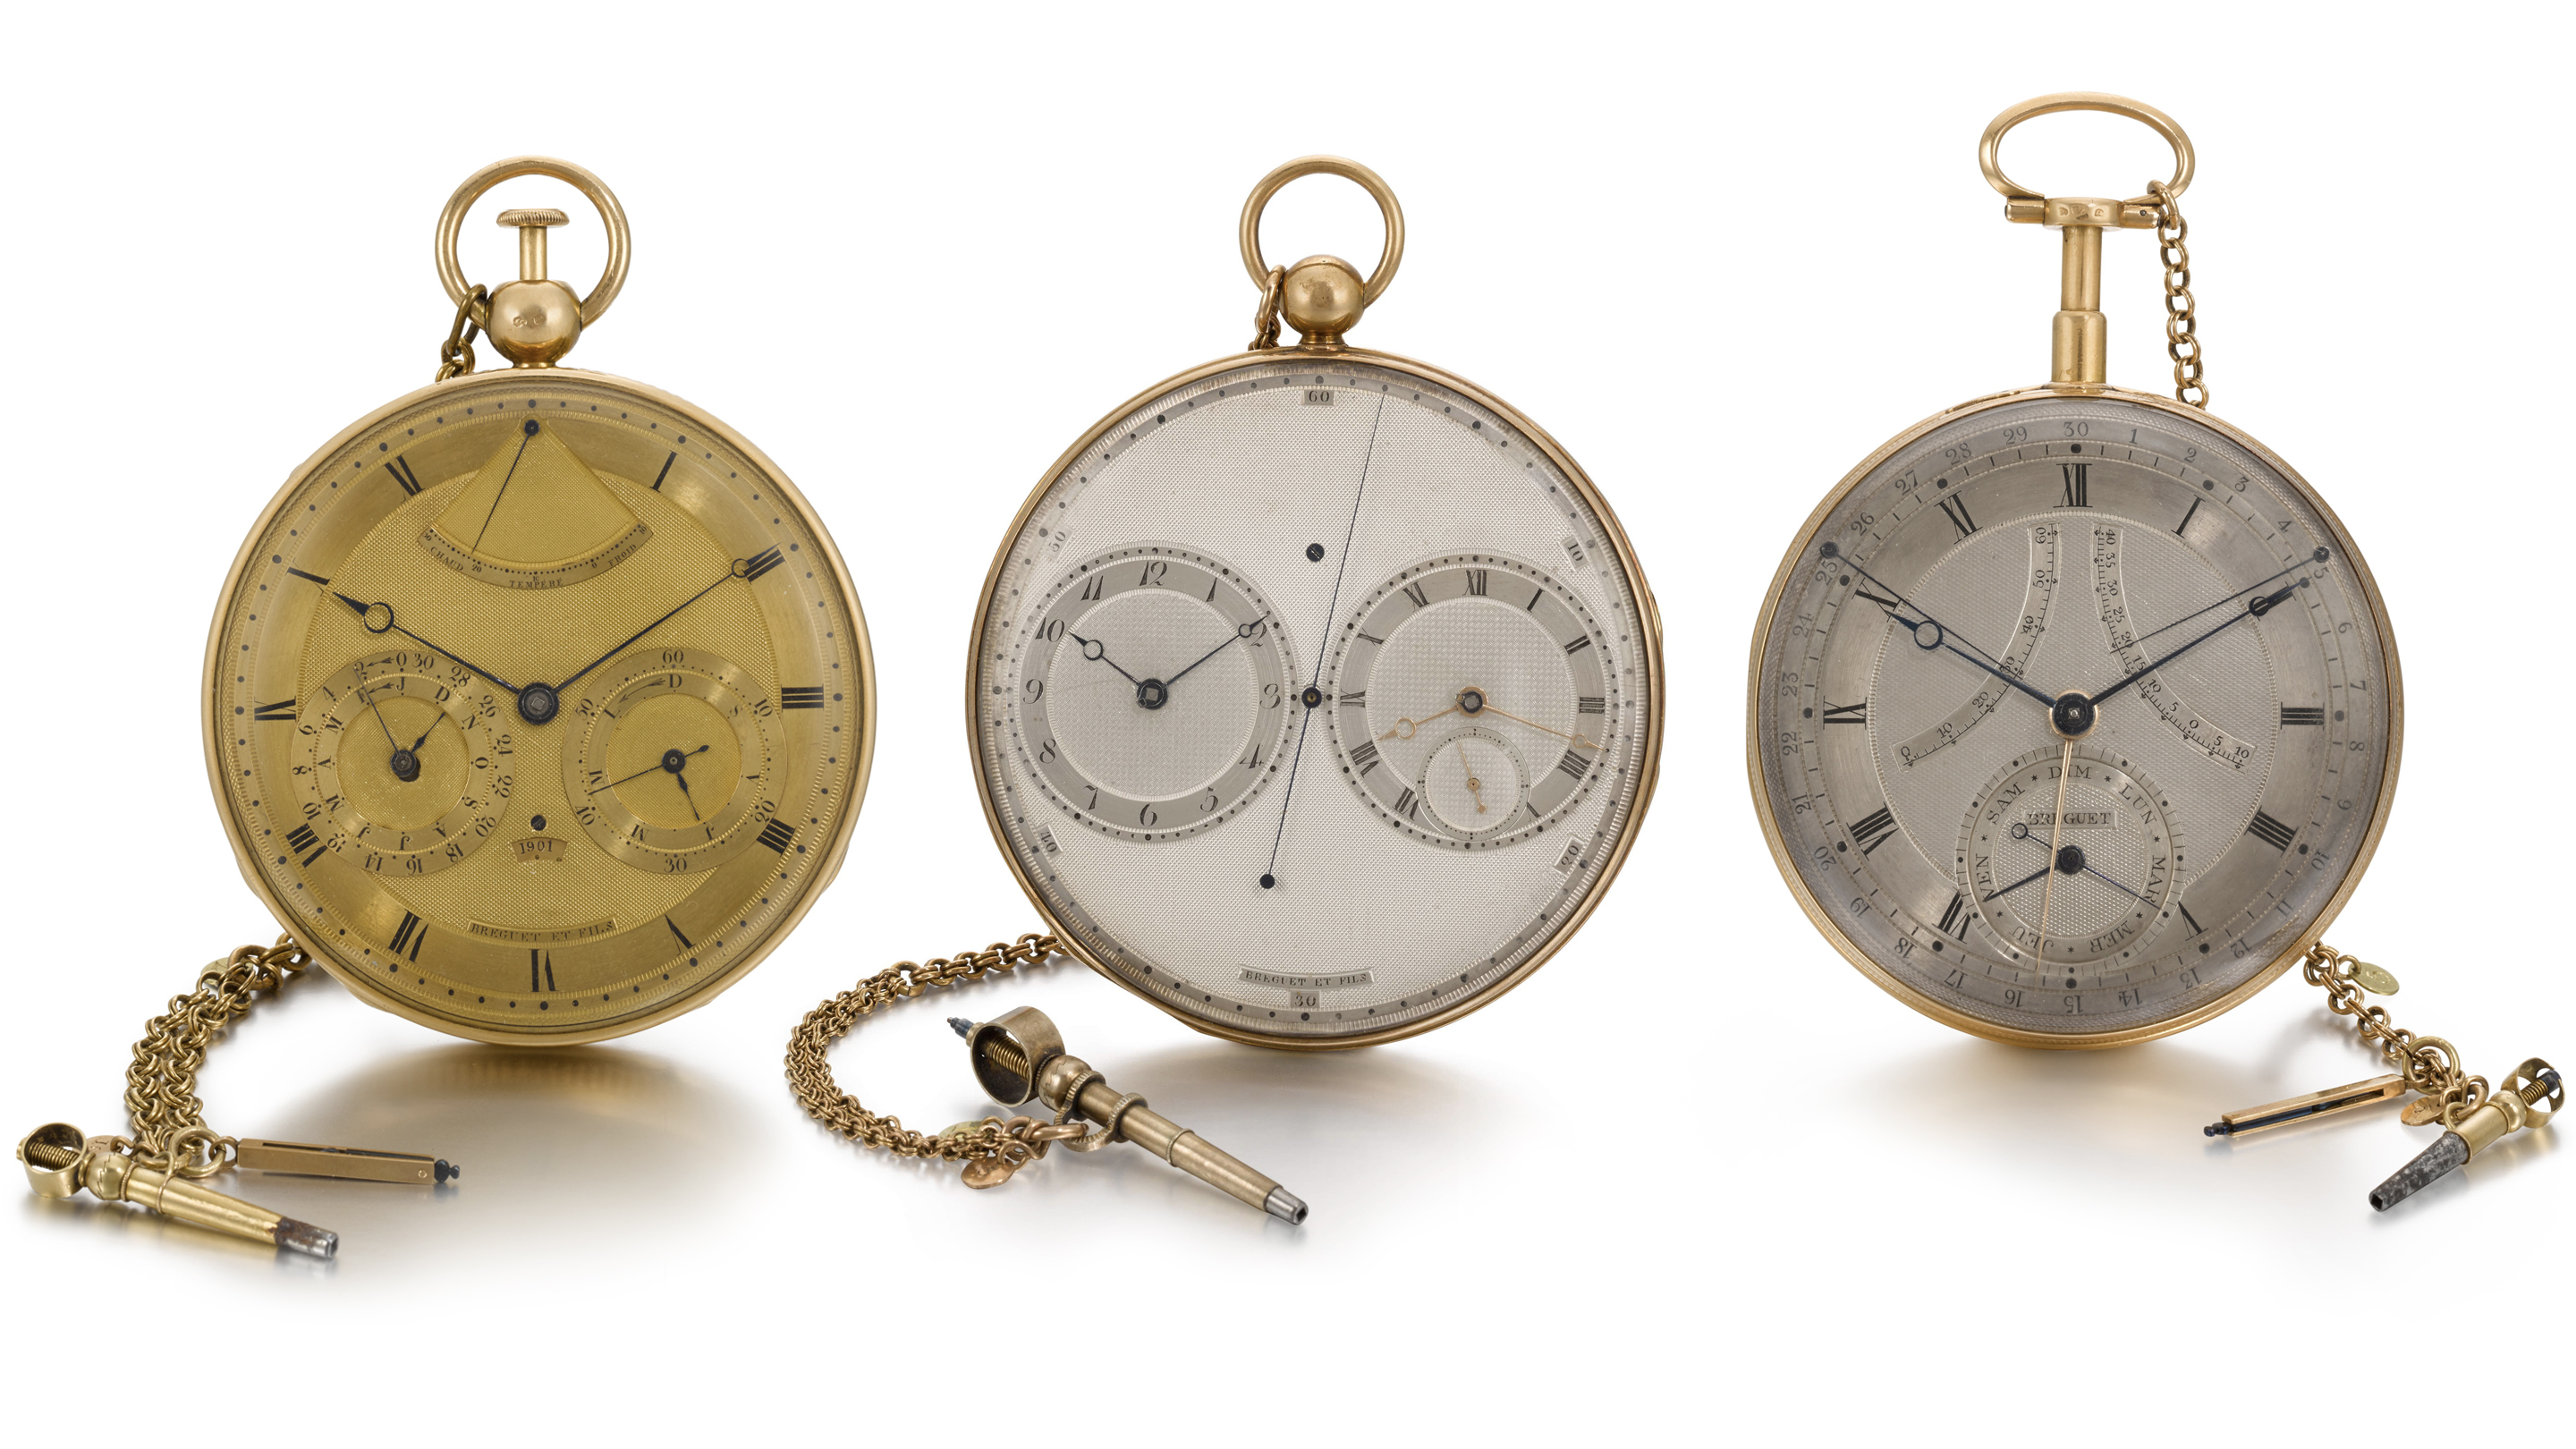 Auctions: Three Breguet Watches From The David Salomons Collection